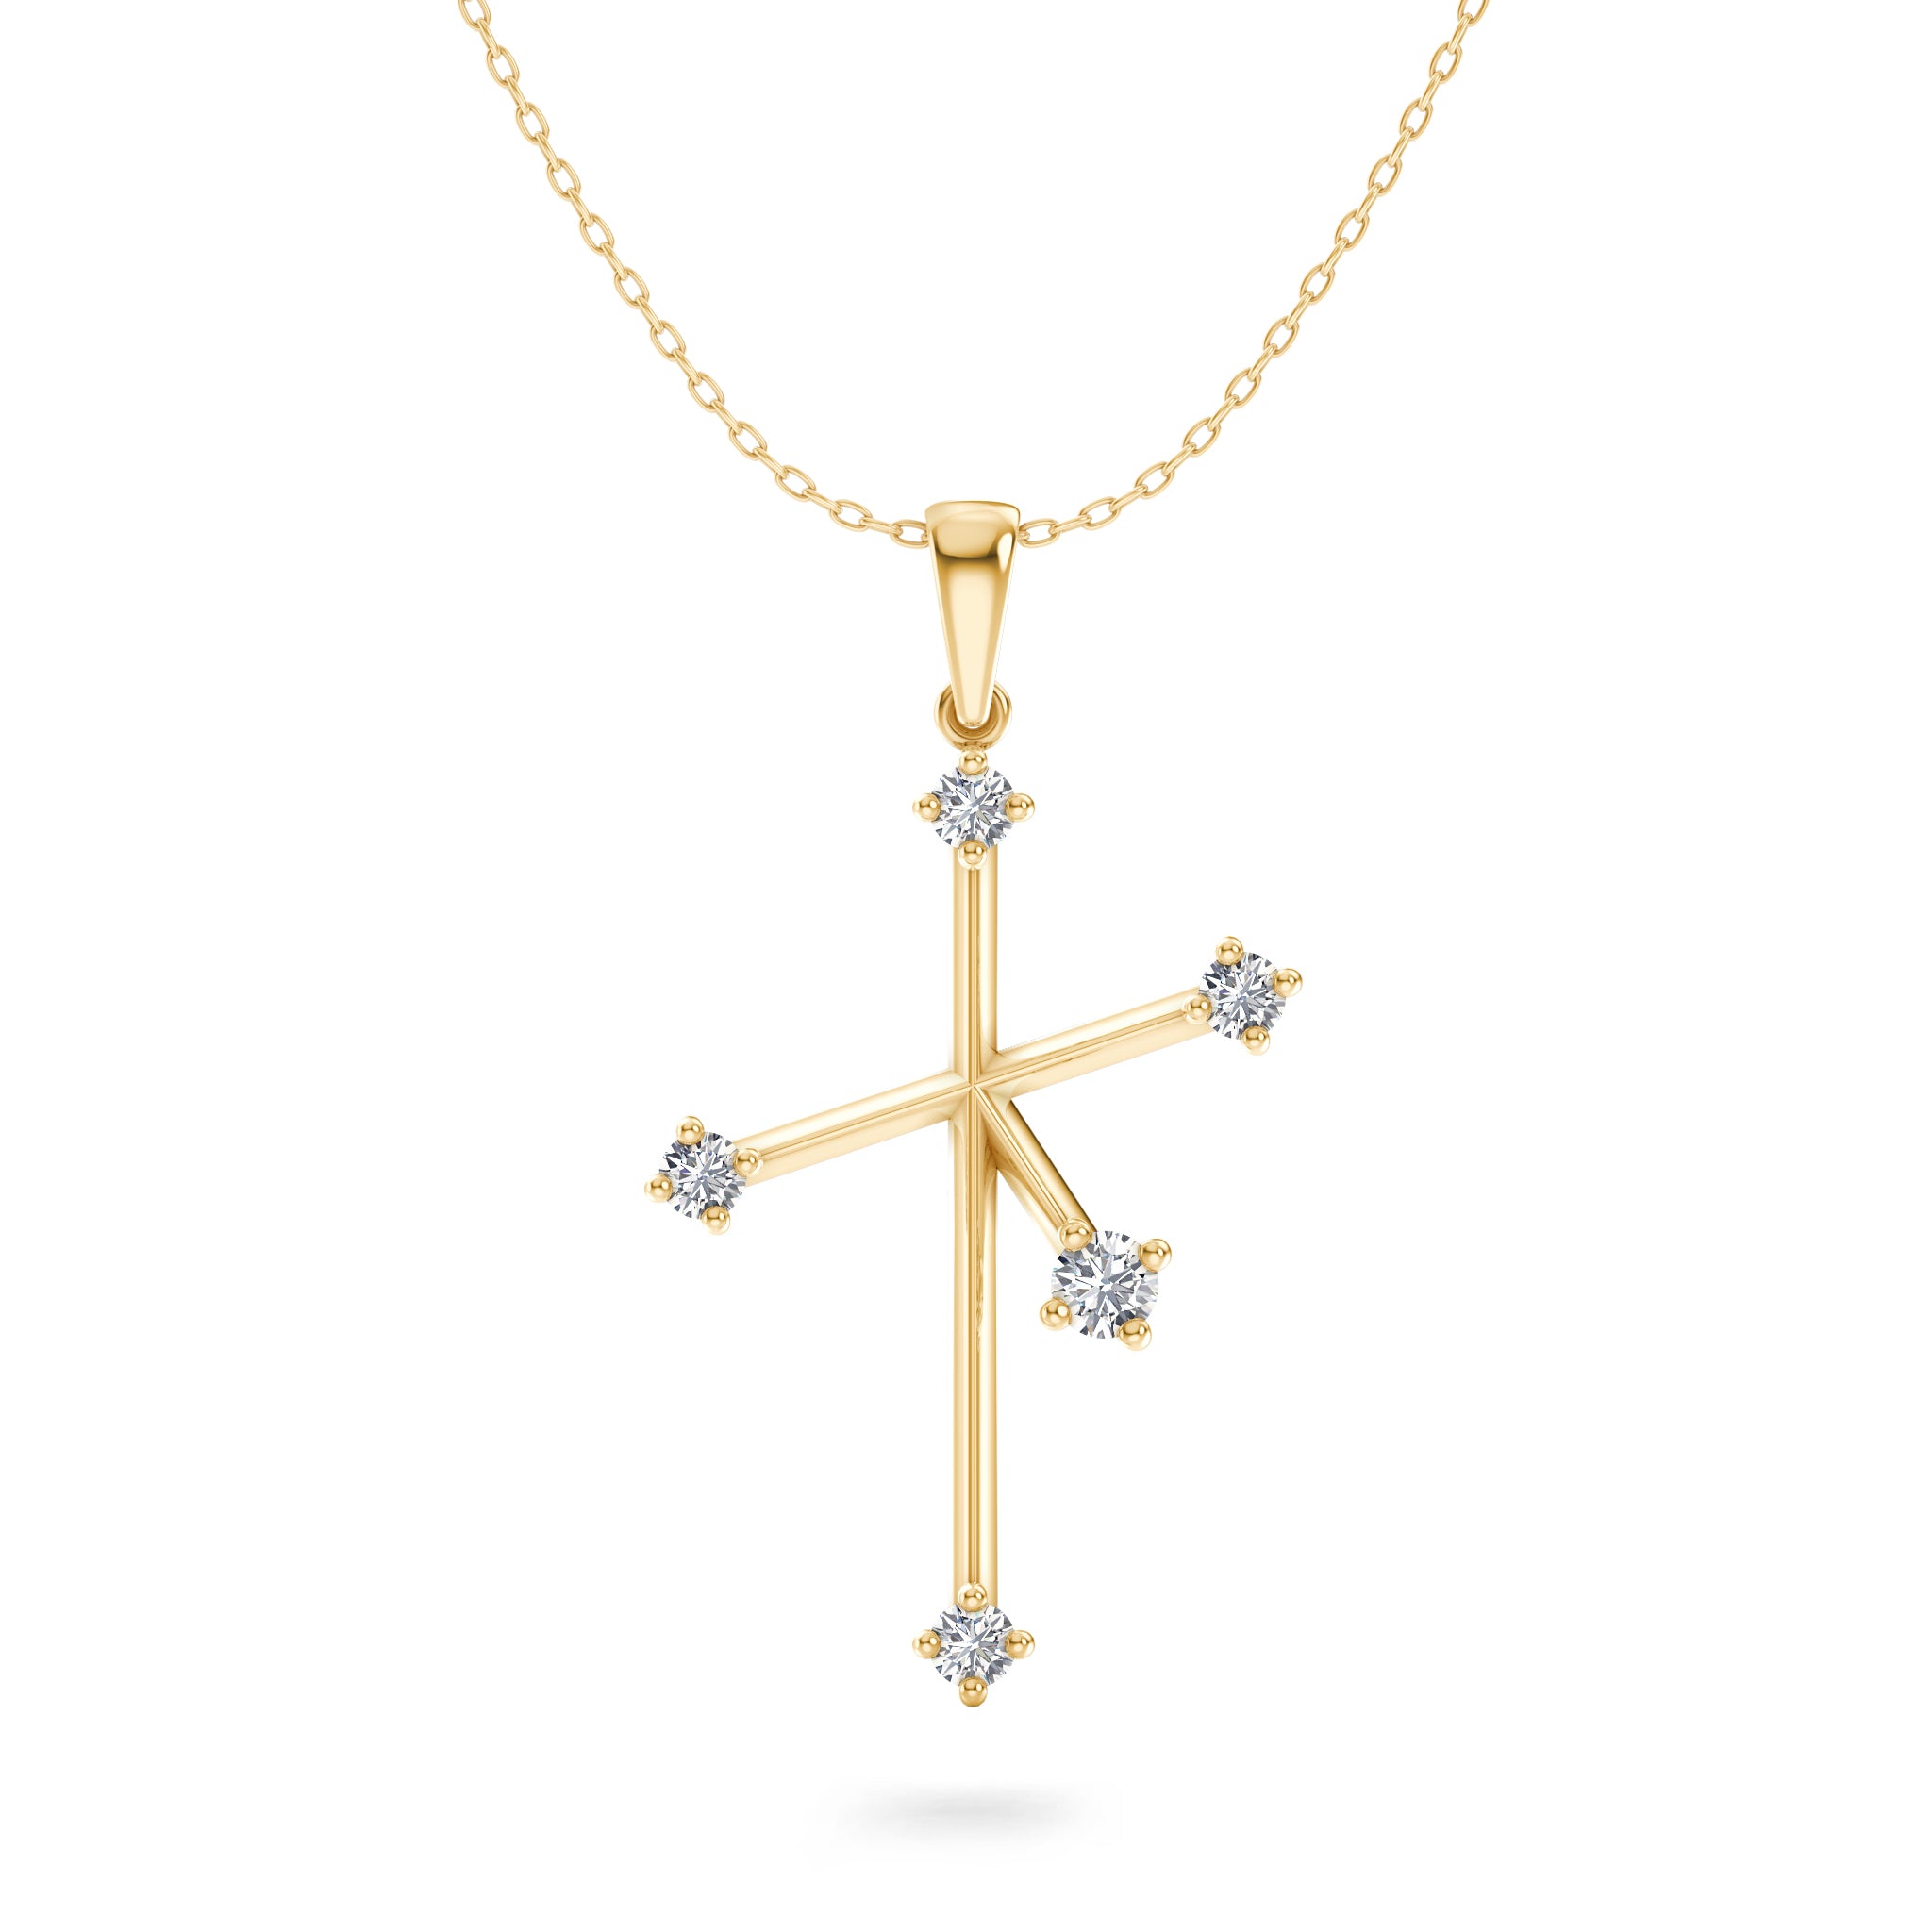 Shimansky - Southern Cross Large Diamond Pendant Crafted in 14K Yellow Gold